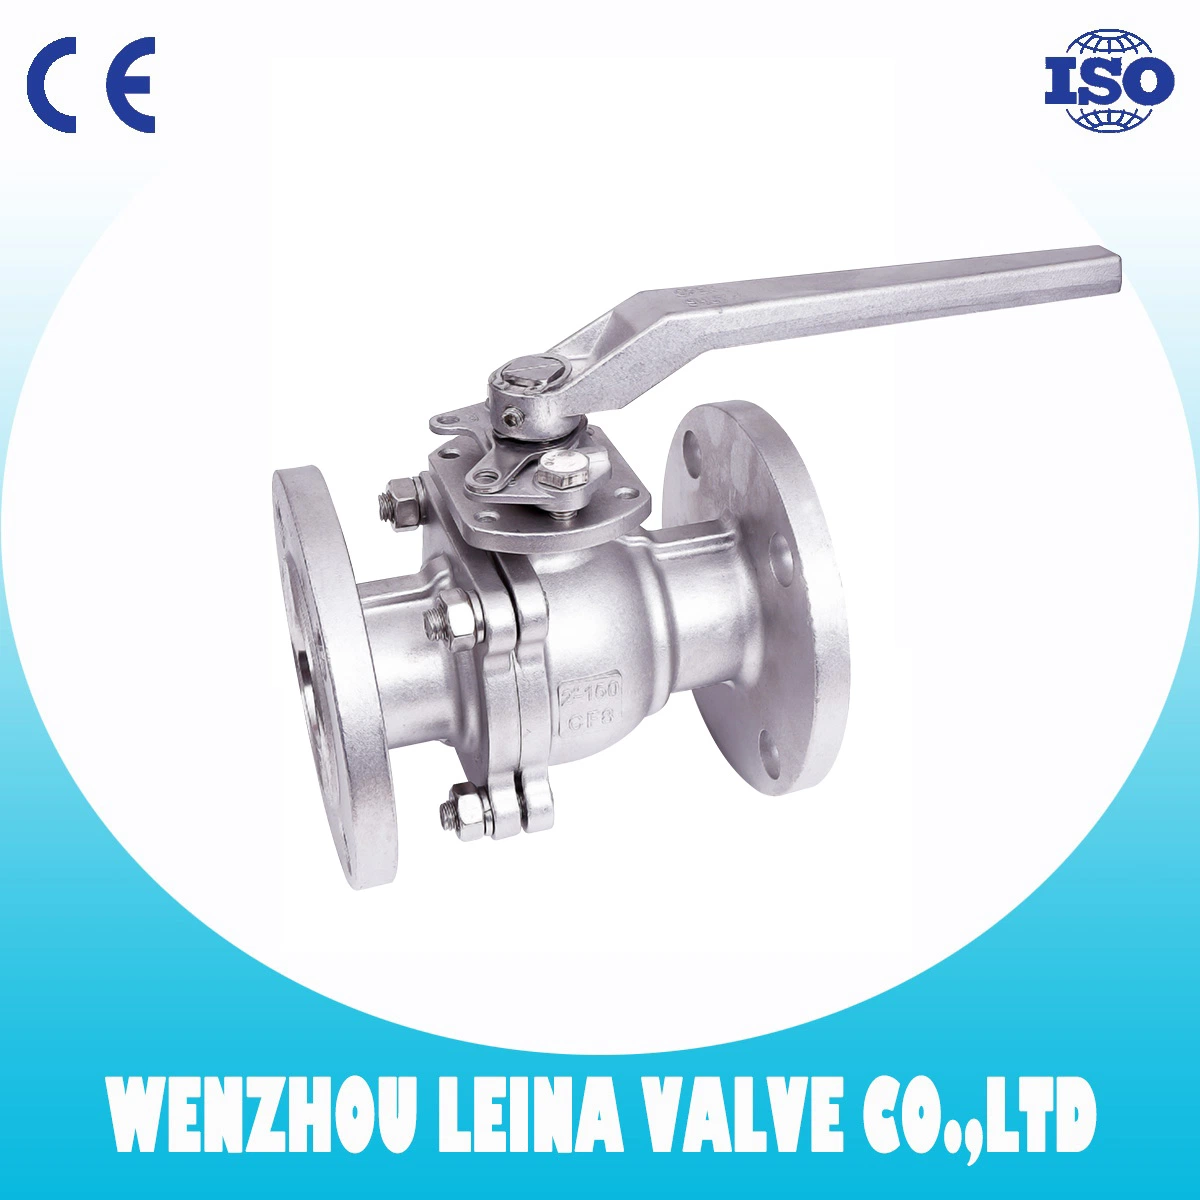 Excellent Ball Valve Supplier - 2PC 150lbs Flange Ball Valve with Mounting Pad